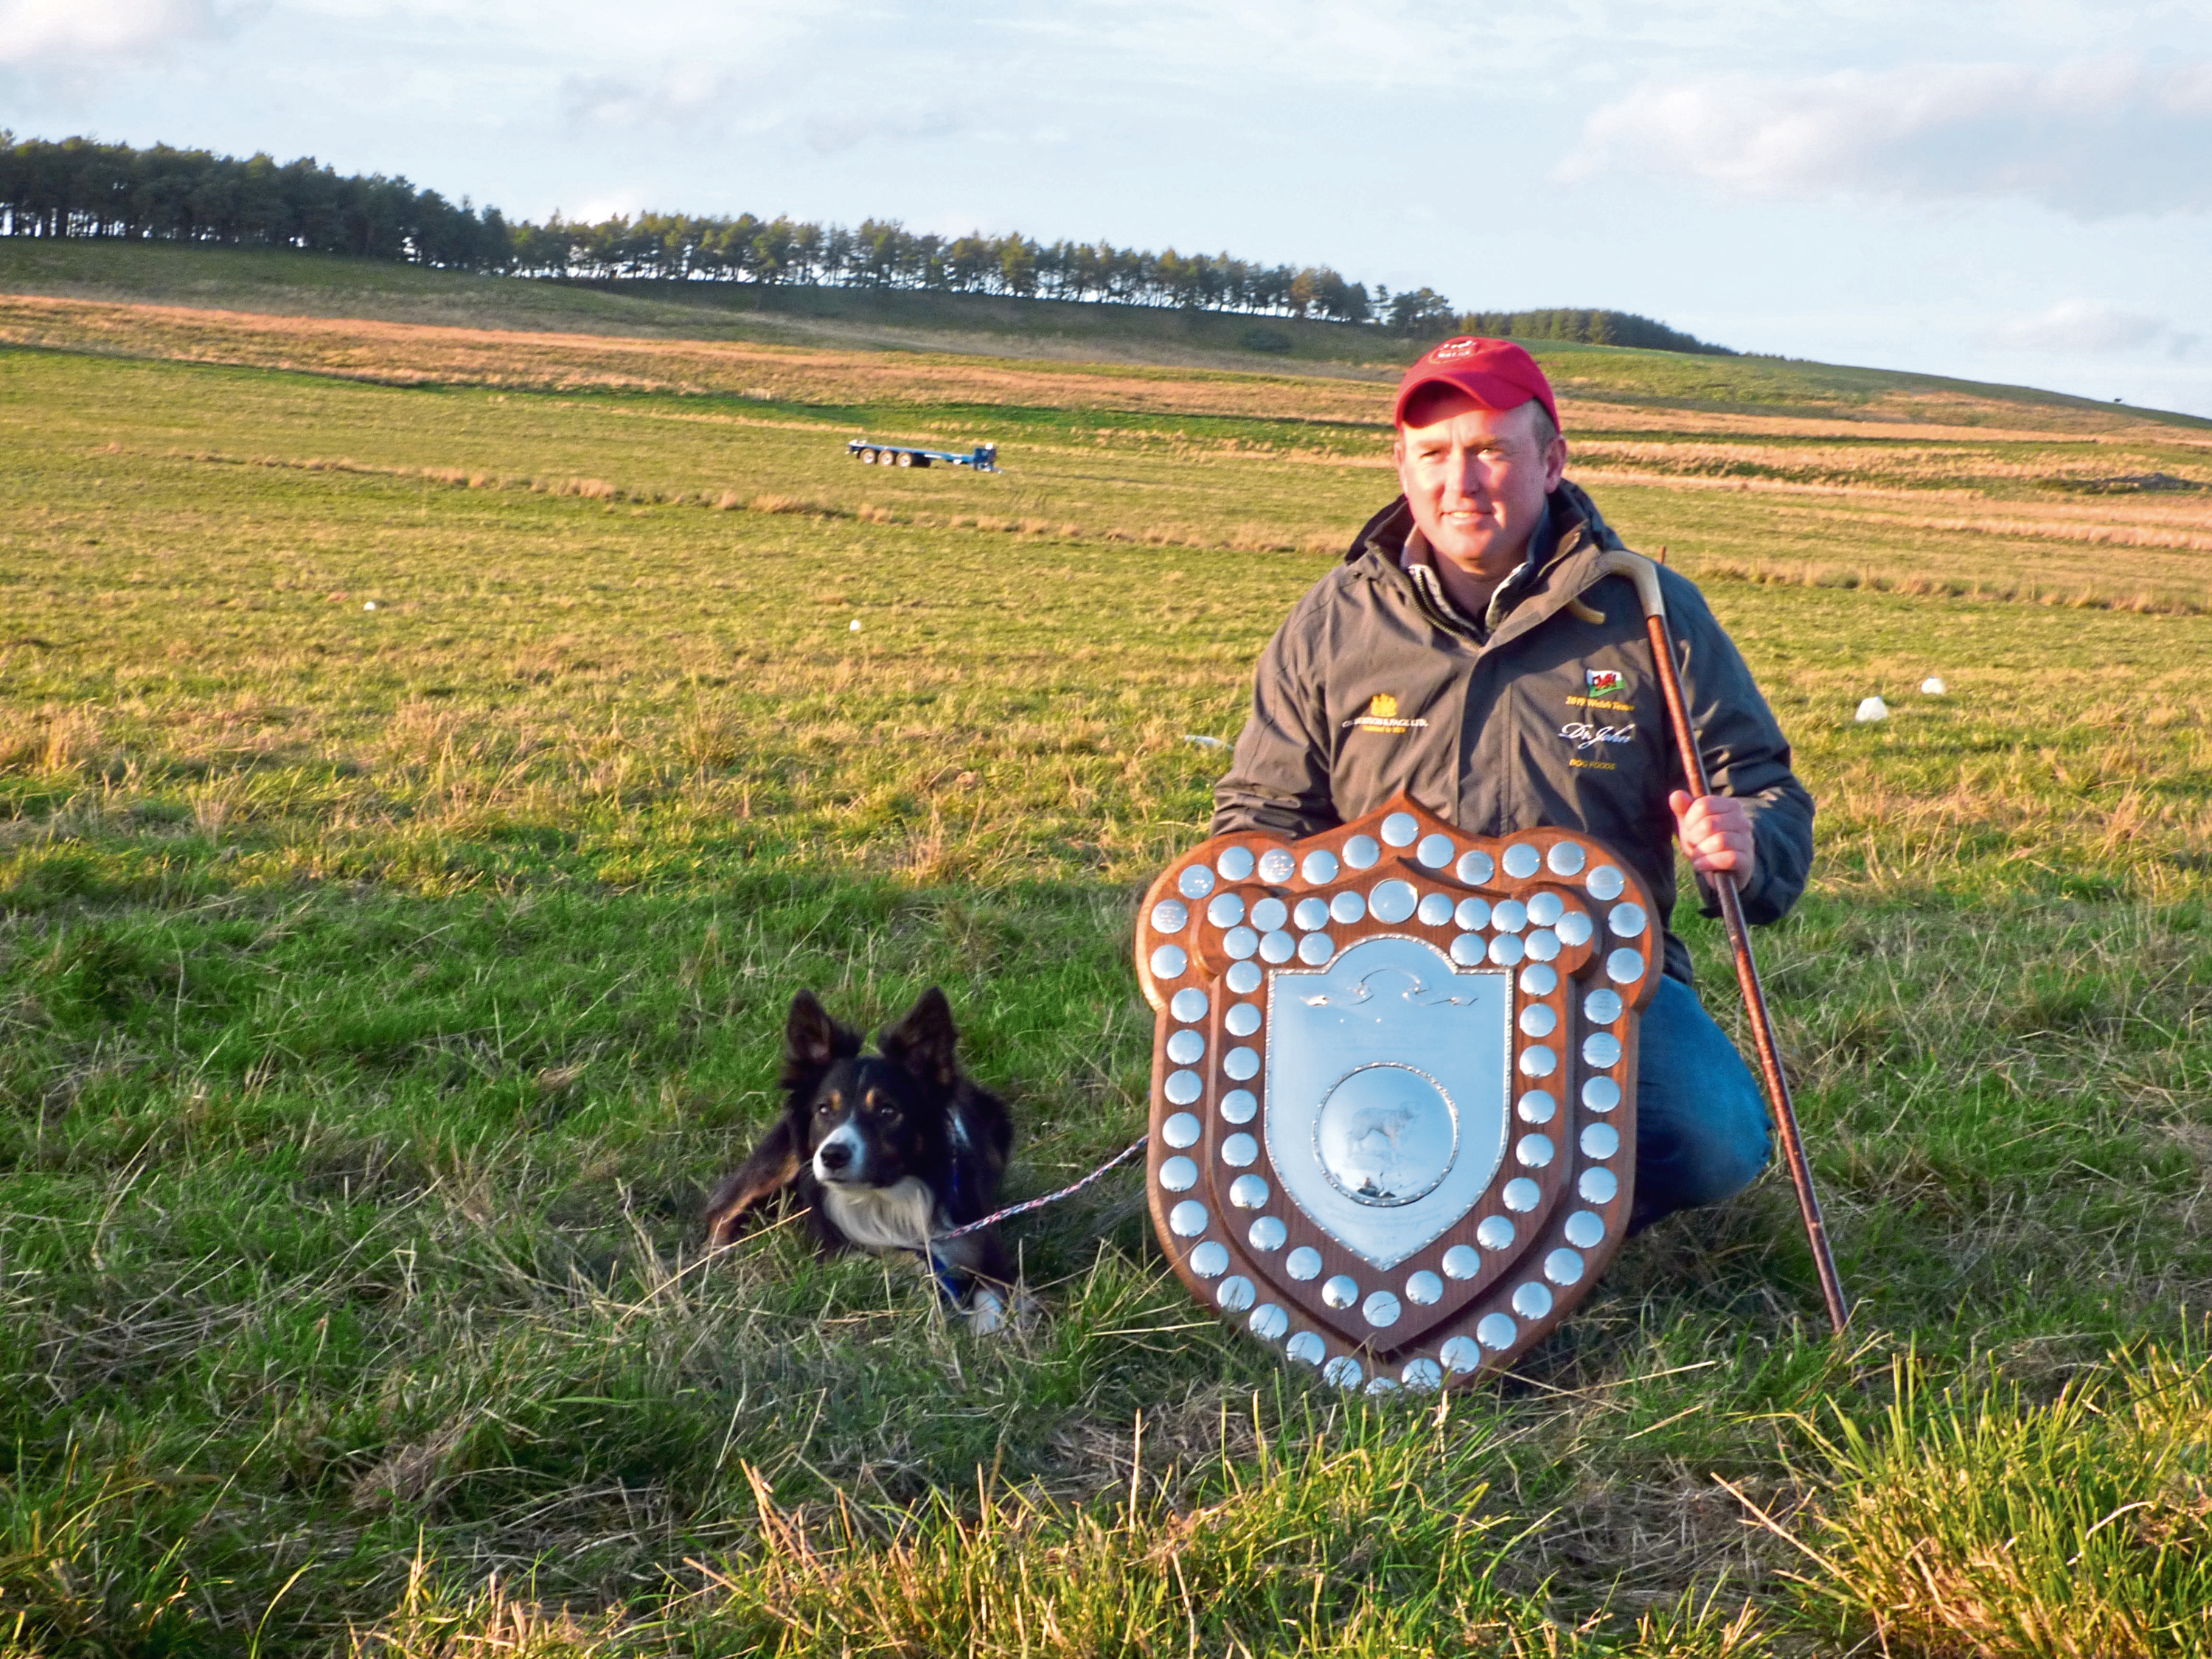 Kevin Evans from Wales,  won the championship with his dog, Hybeck Blake.